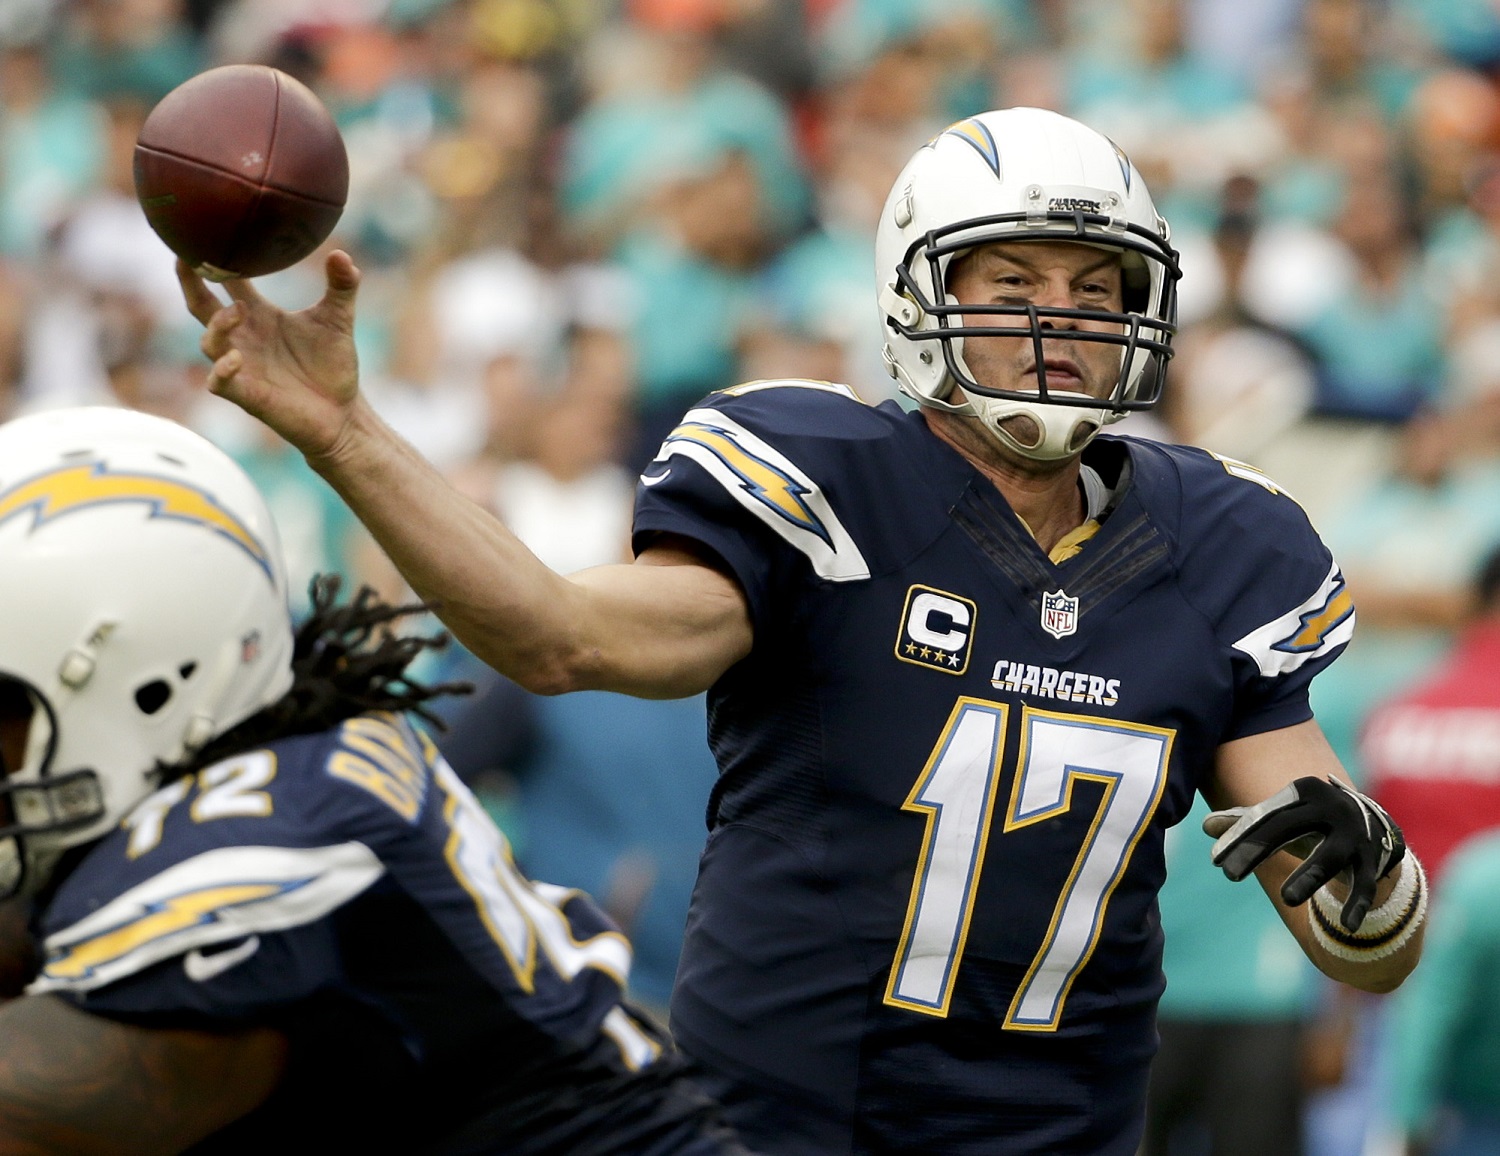 San Diego Chargers quarterback Philip Rivers passes against the Miami Dolphins during the first half in an NFL football game Sunday, Dec. 20, 2015, in San Diego. (AP Photo/Gregory Bull)